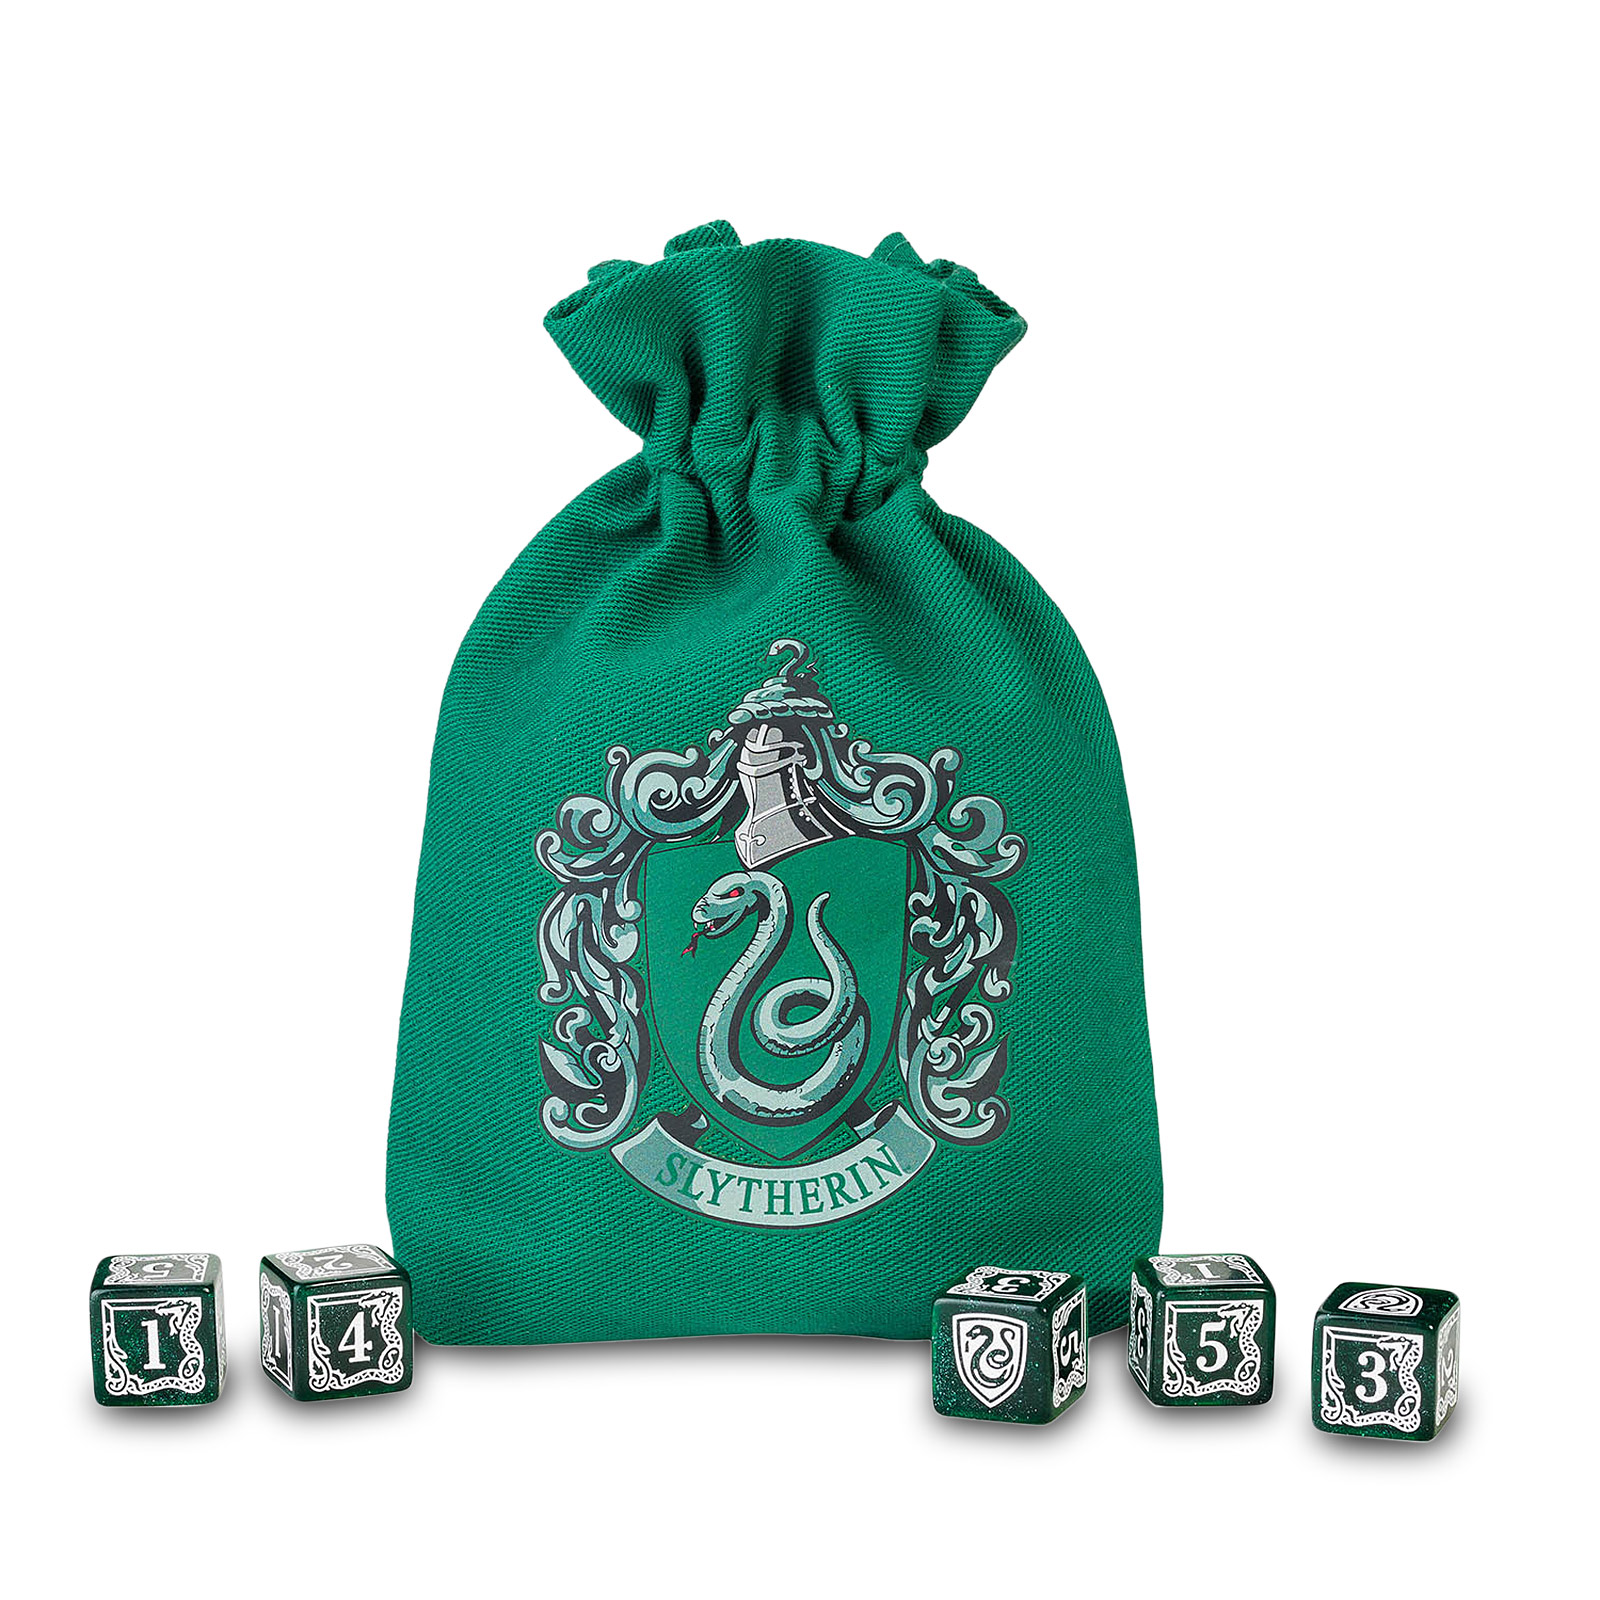 Harry Potter - Slytherin RPG Dice Set 5pcs with Dice Bag Green